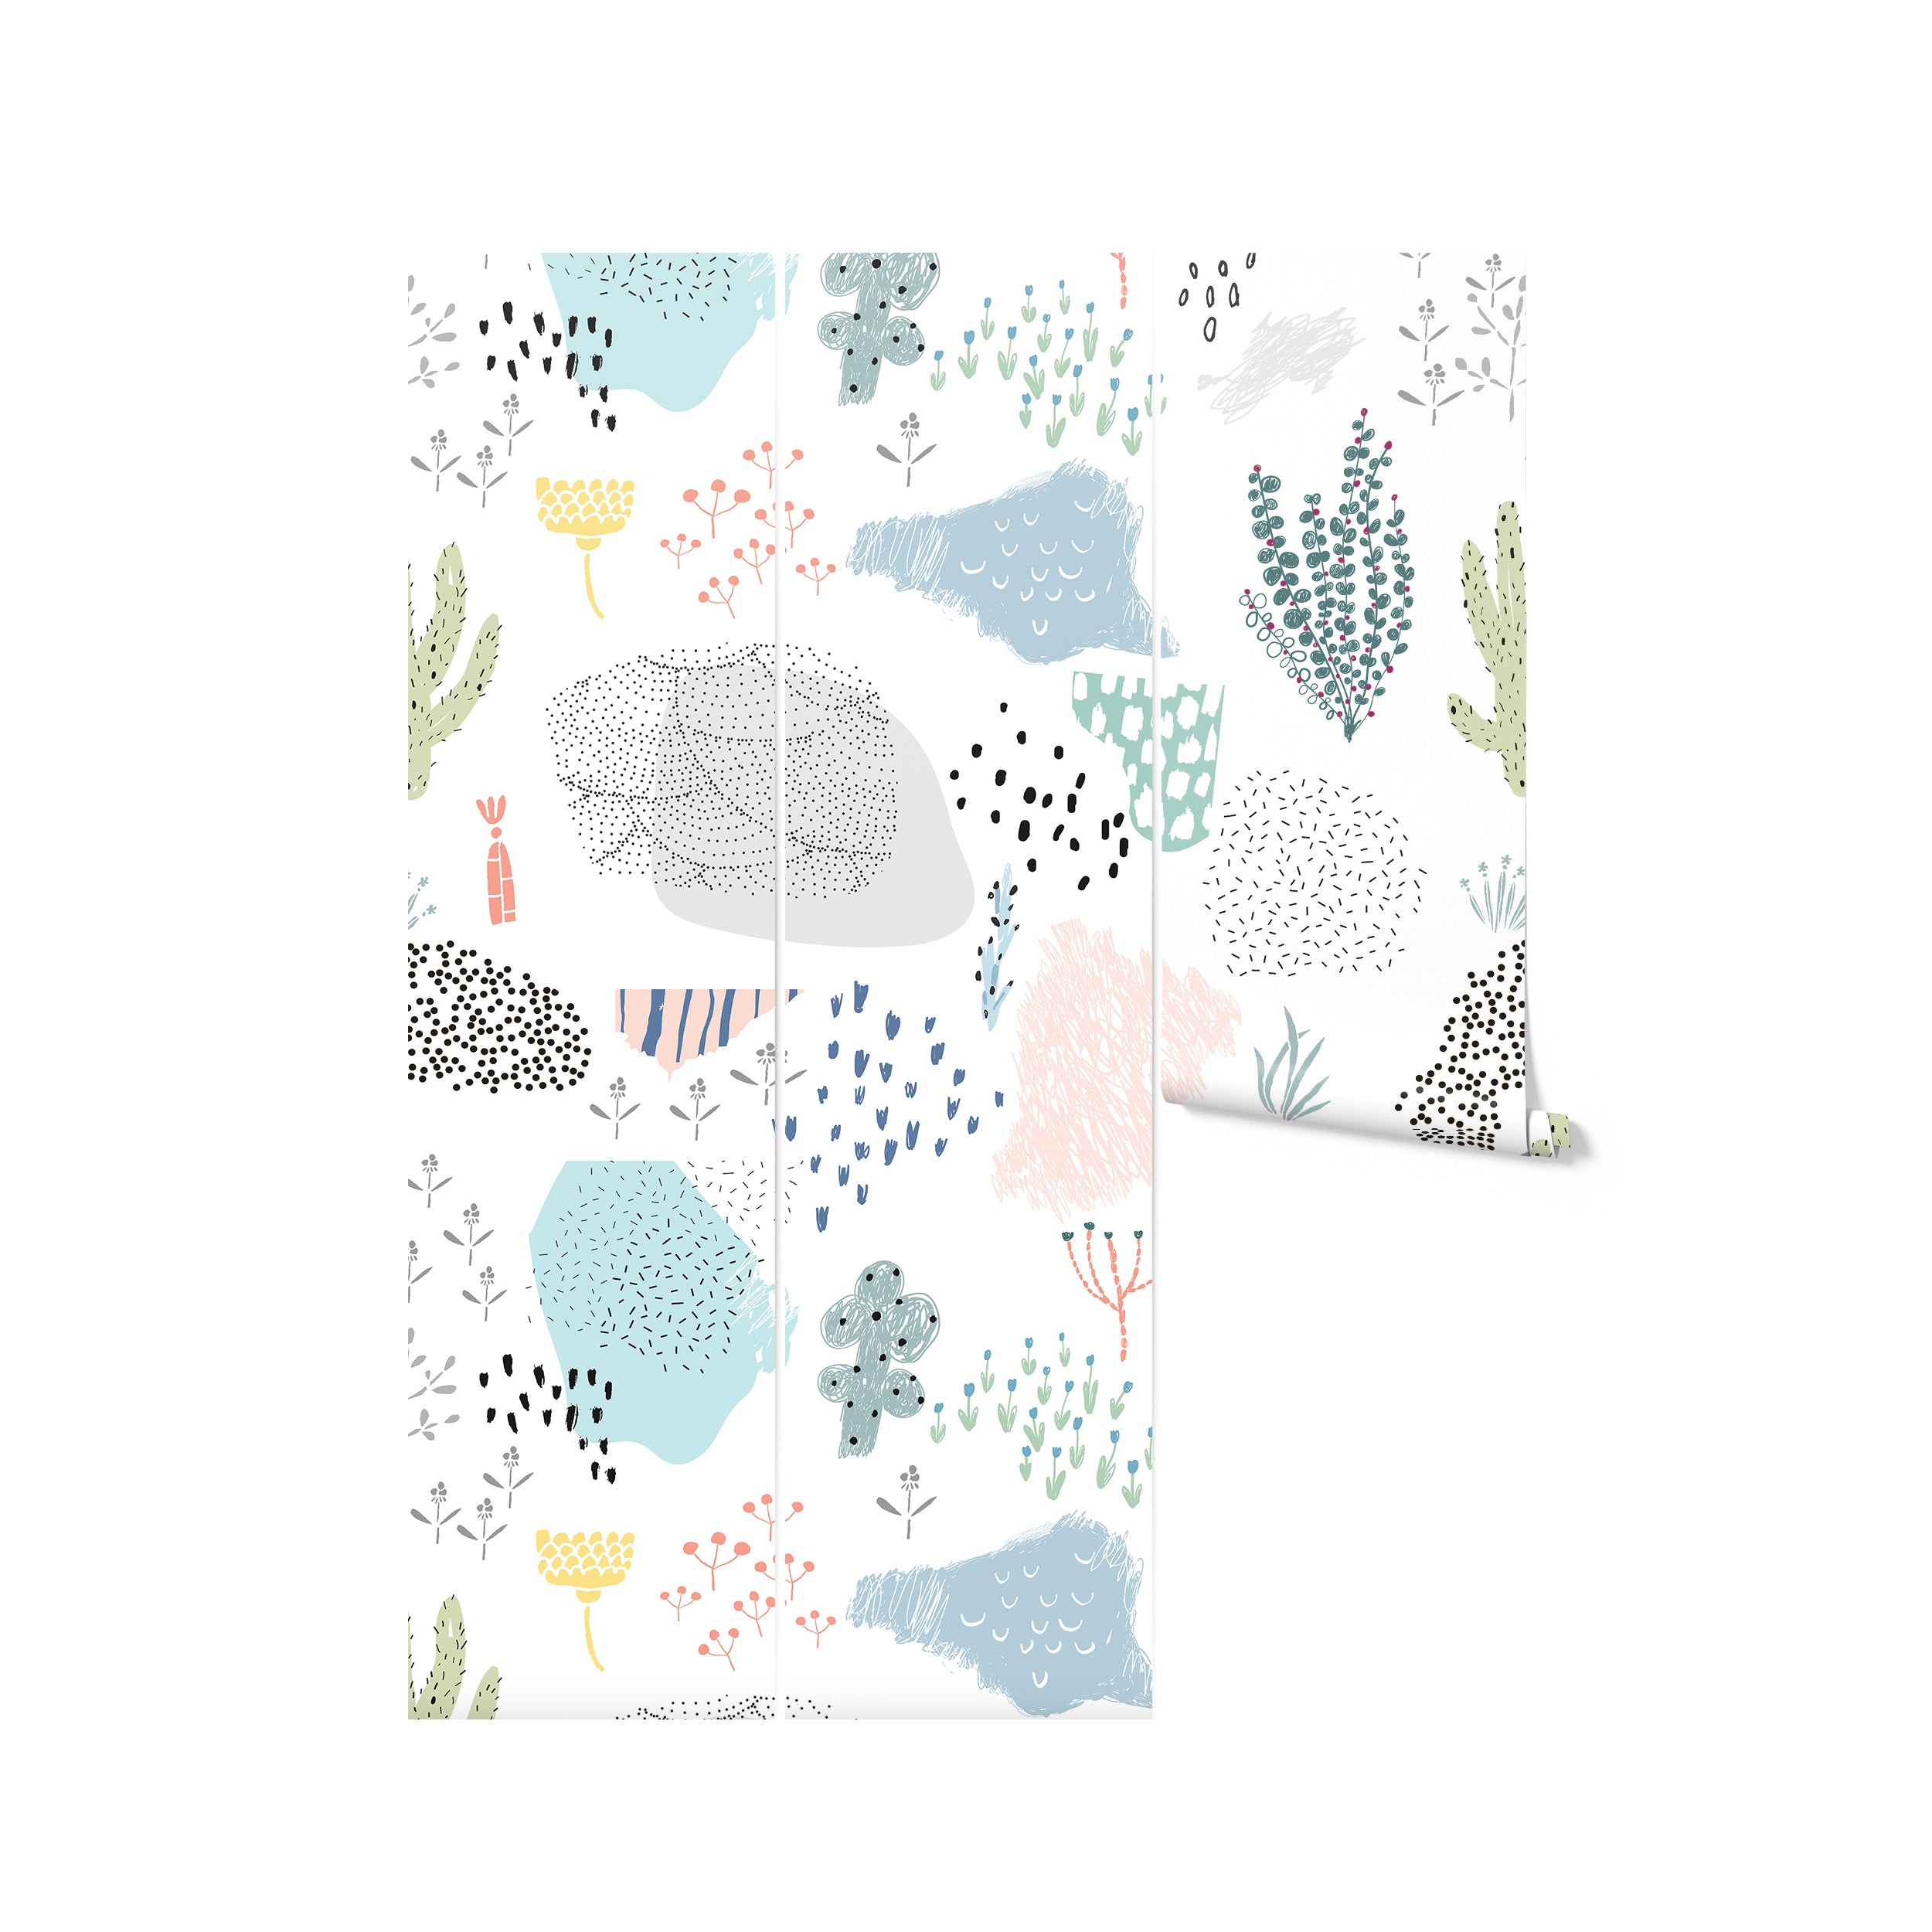 Two rolls of Kids Wallpaper - Doodles displayed side by side, highlighting the playful and colorful doodles of plants, cacti, and abstract shapes on a white background